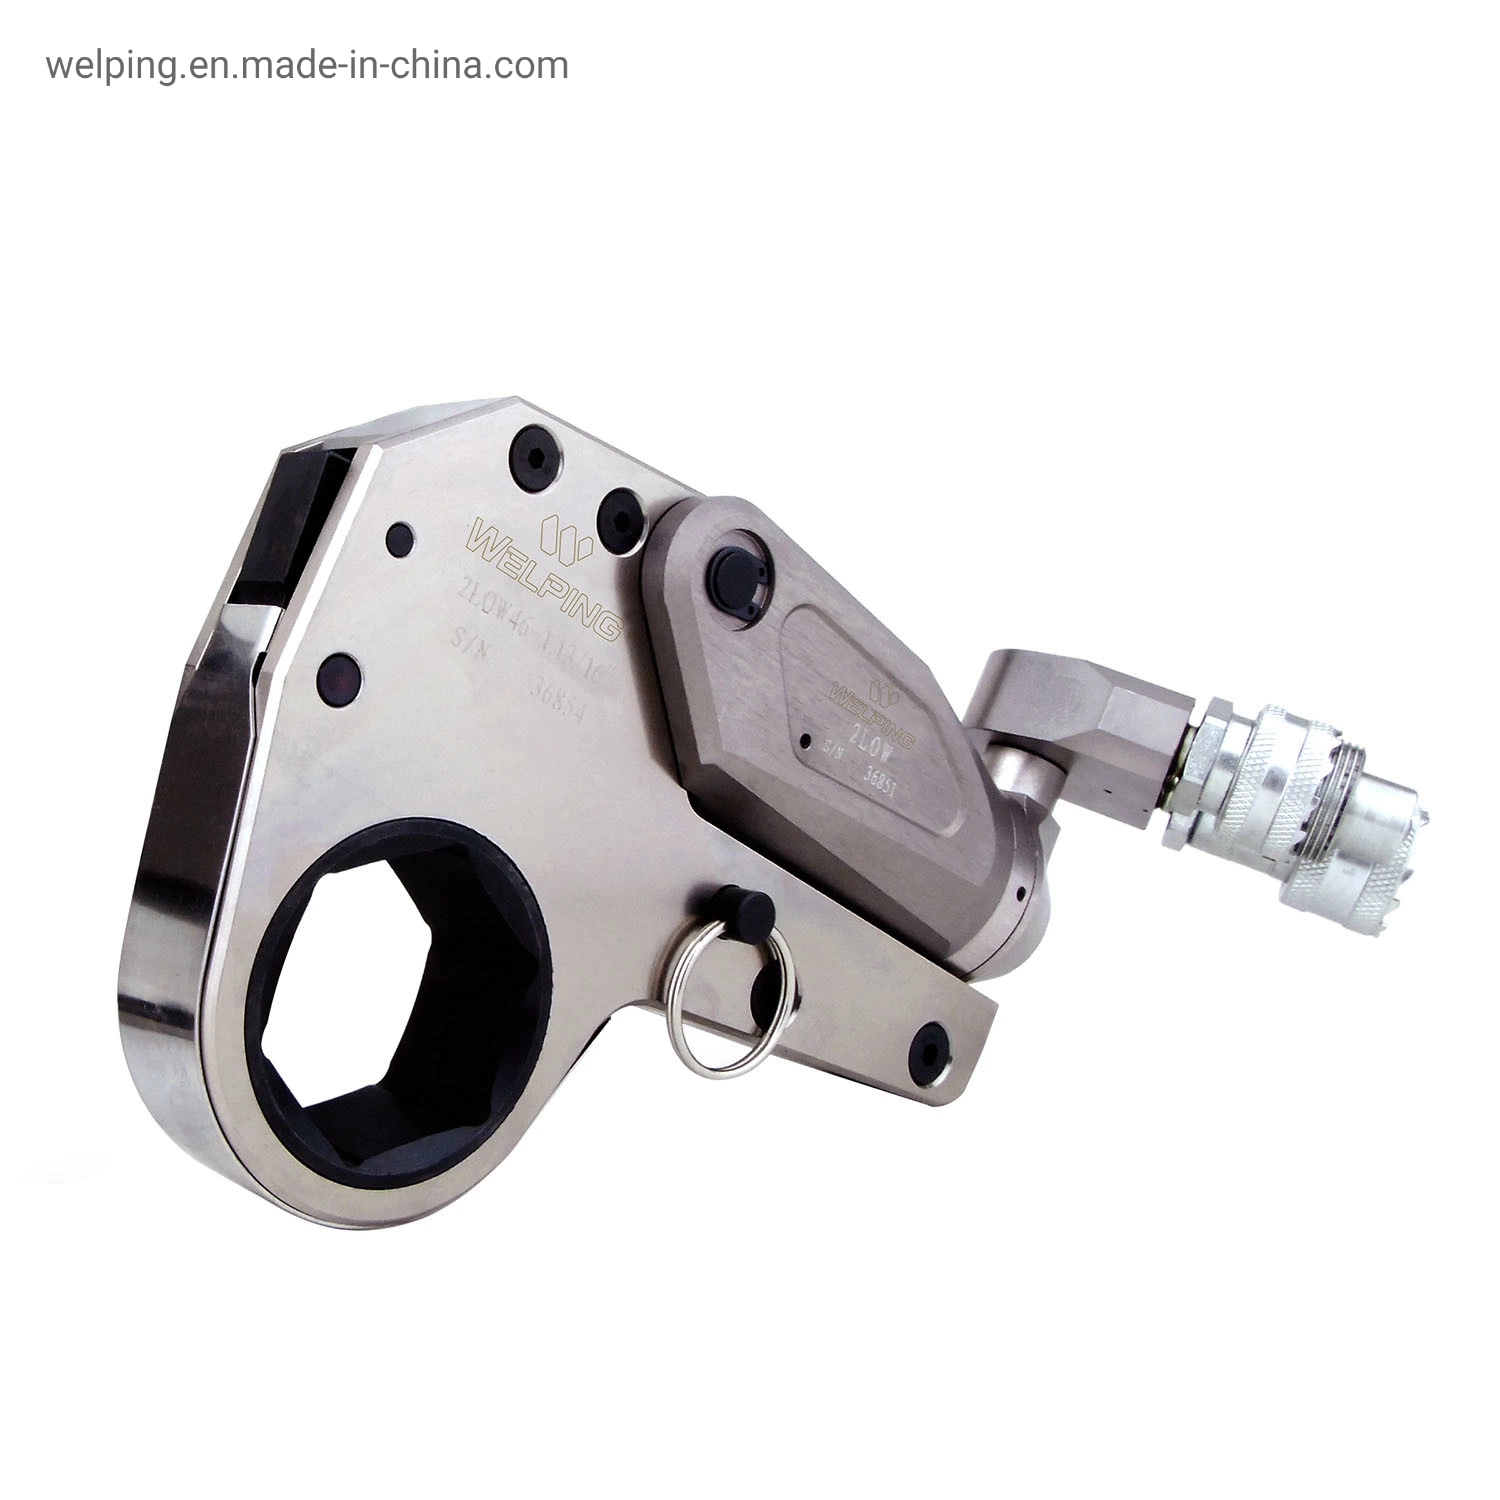 Welping Best Selling Hexagon Ratchet Hollow Torque Hydraulic Wrench Square Drive Wrench